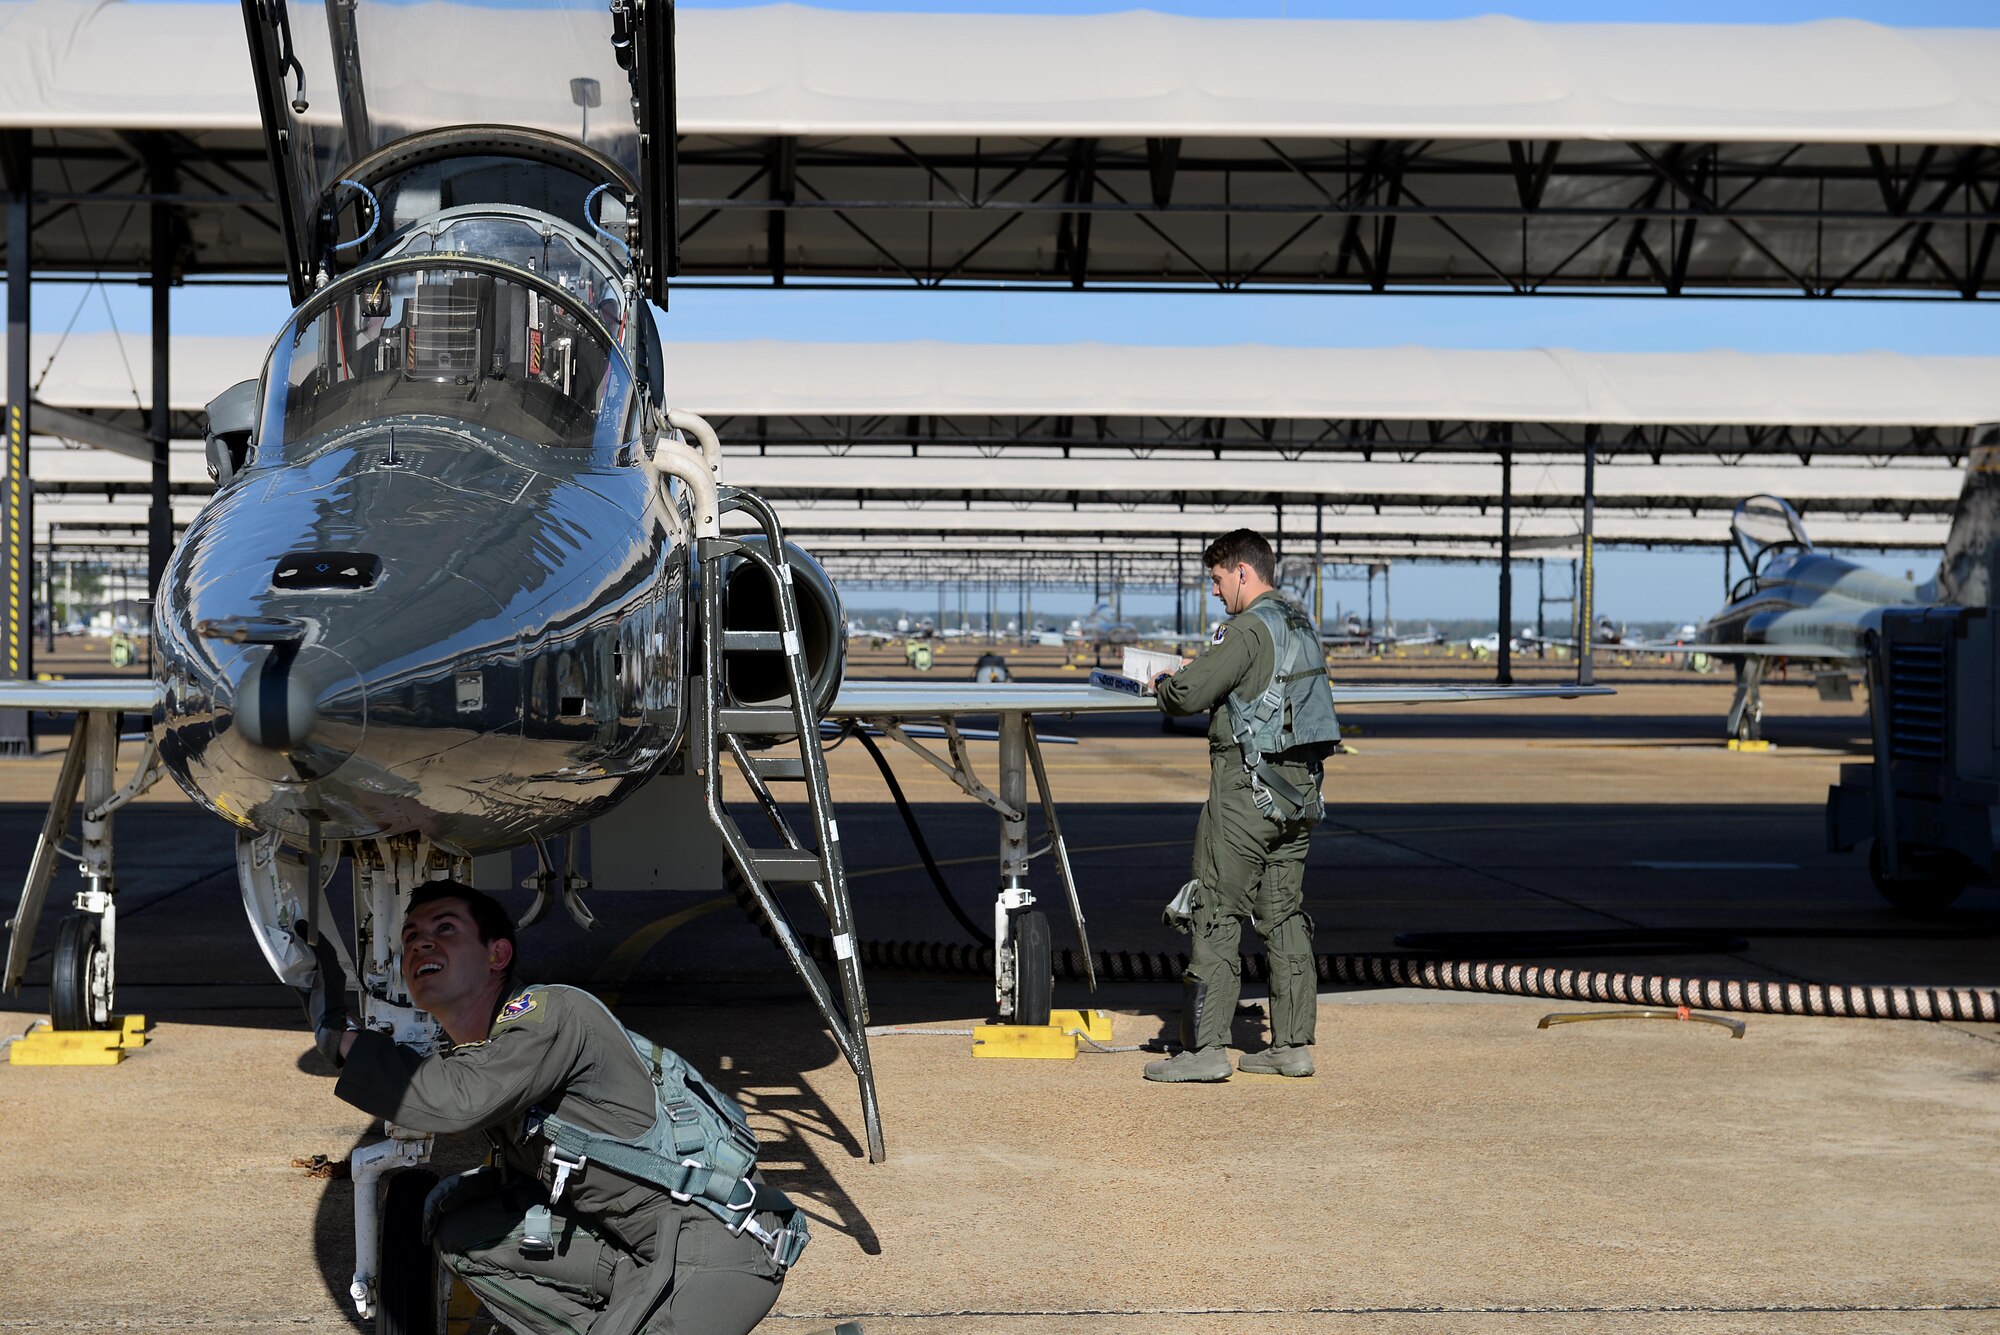 First Lt. Tyler Hansen, 49th Fighter Training Squadron student pilot, and Capt. Cole Stegeman, 49th FTS upgrading instructor pilot, check over a T-38C Talon in preparation for a training sortie Oct. 30, 2018, on Columbus Air Force Base, Mississippi. Pilots dedicate a great deal of time and effort ensuring their aircraft is fully prepared for flight. (U.S. Air Force photo by Airman Hannah Bean)